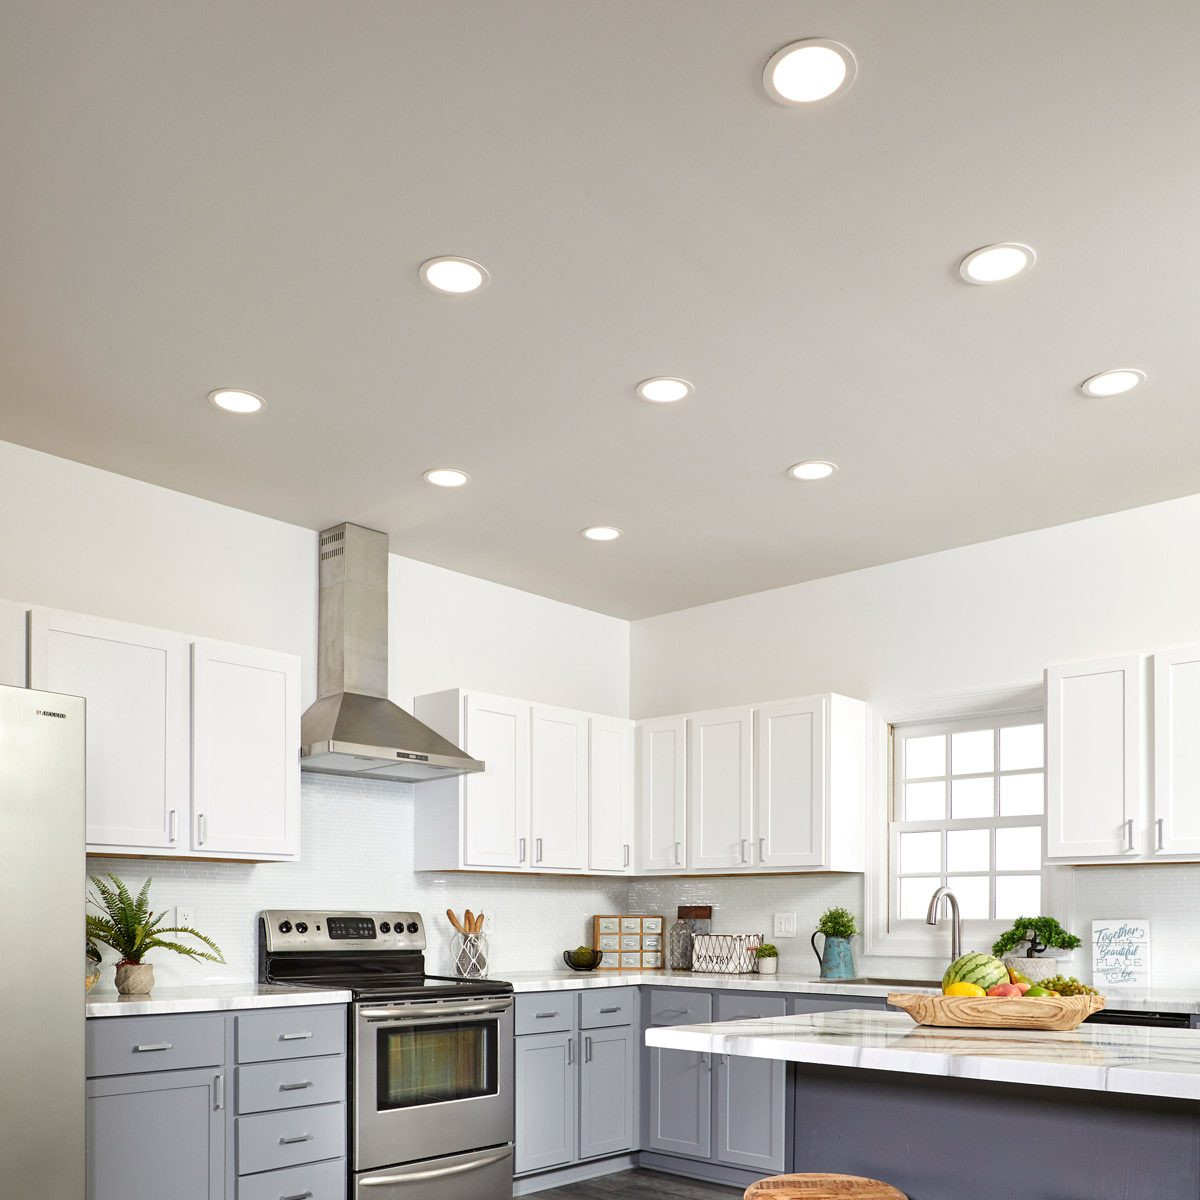 Led Kitchen Light
 How to Install Low Profile LED Lights in Your Kitchen